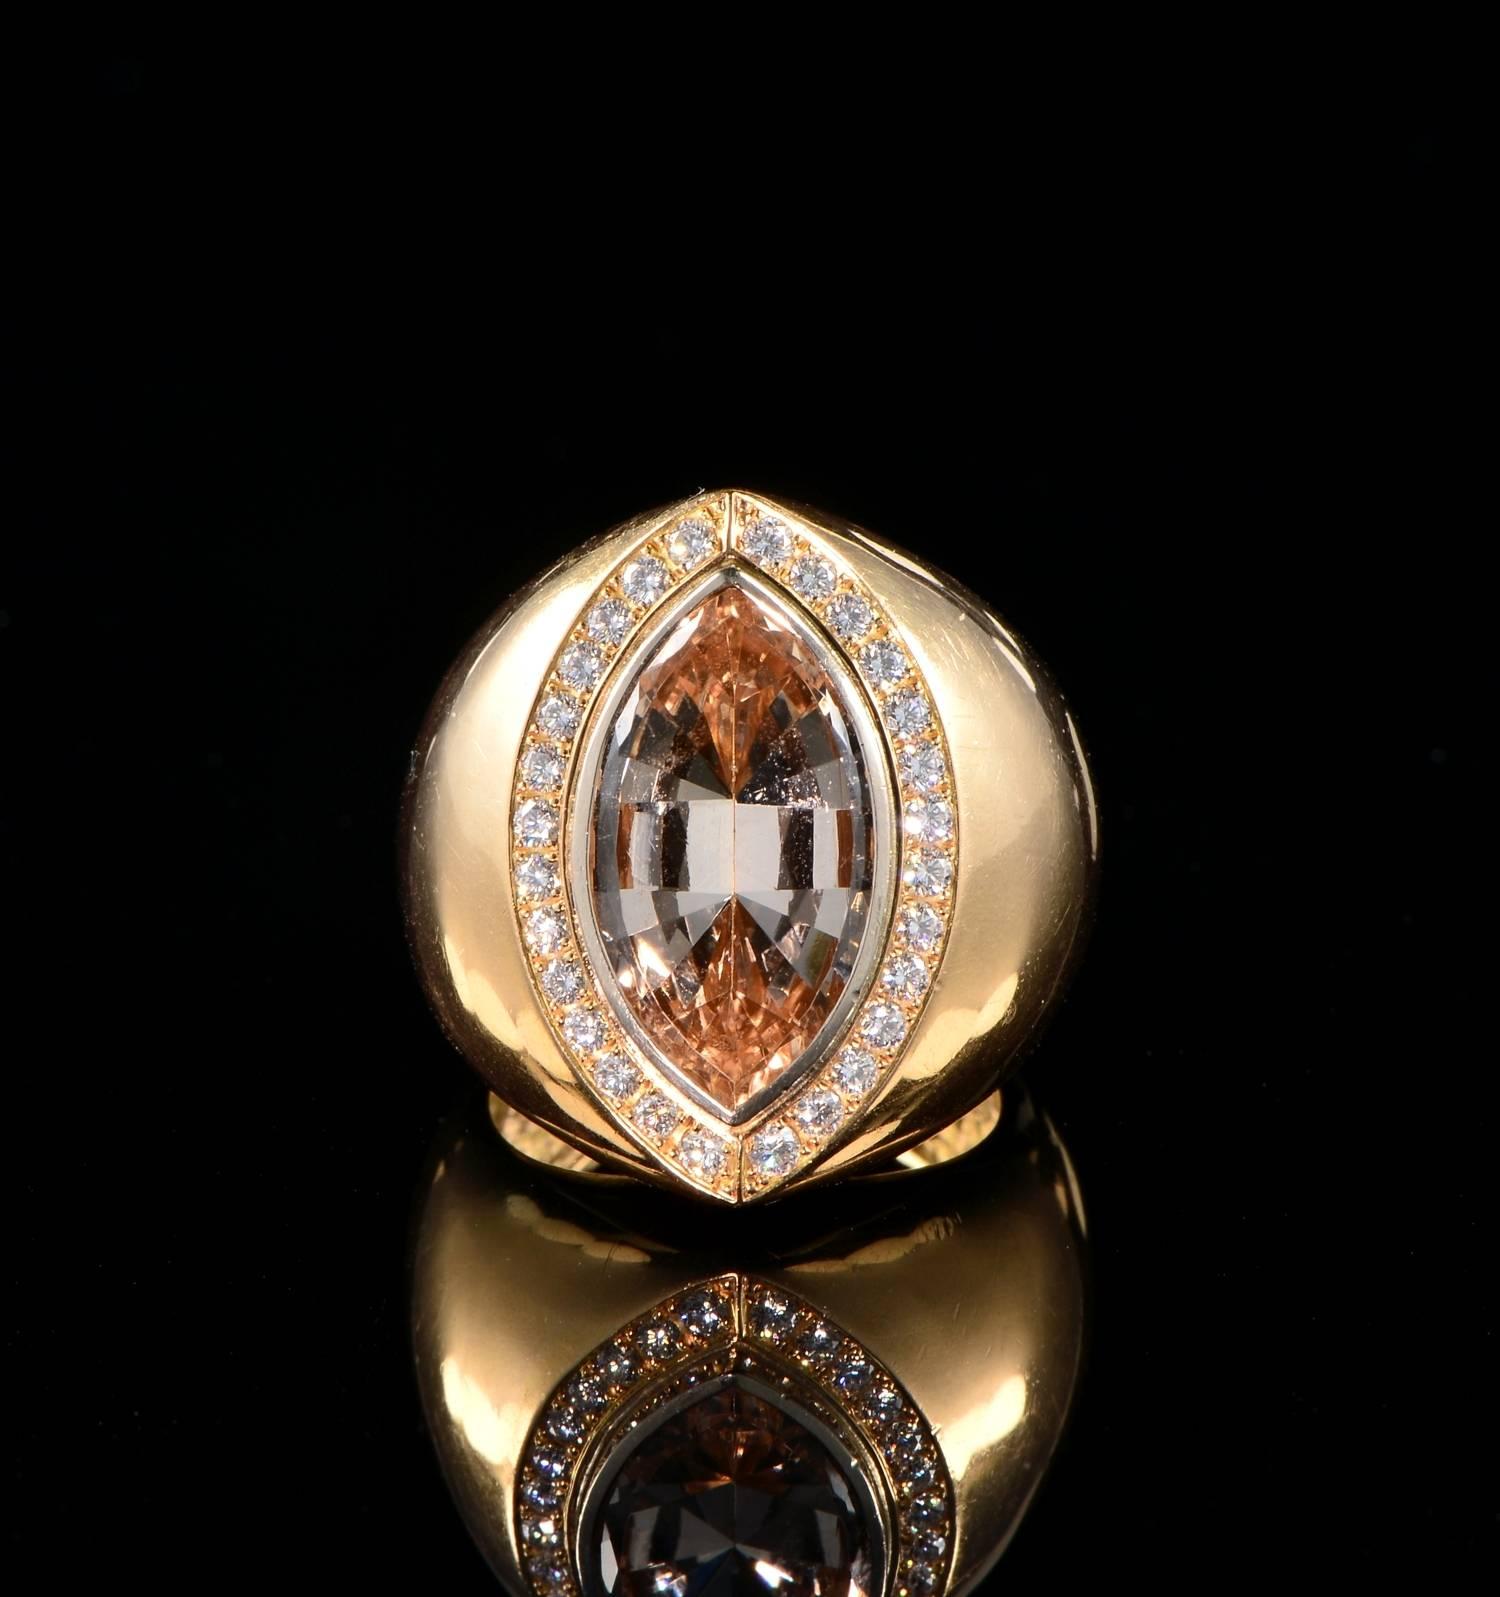 Exclusive design all superbly hand crafted of solid 18 kt ROSE gold very substantially made it weighs 19.6 grams

Design has been inspired by the shape of the Natural Imperial Topaz set on it simple and very eye catching

The ring is marked for 18